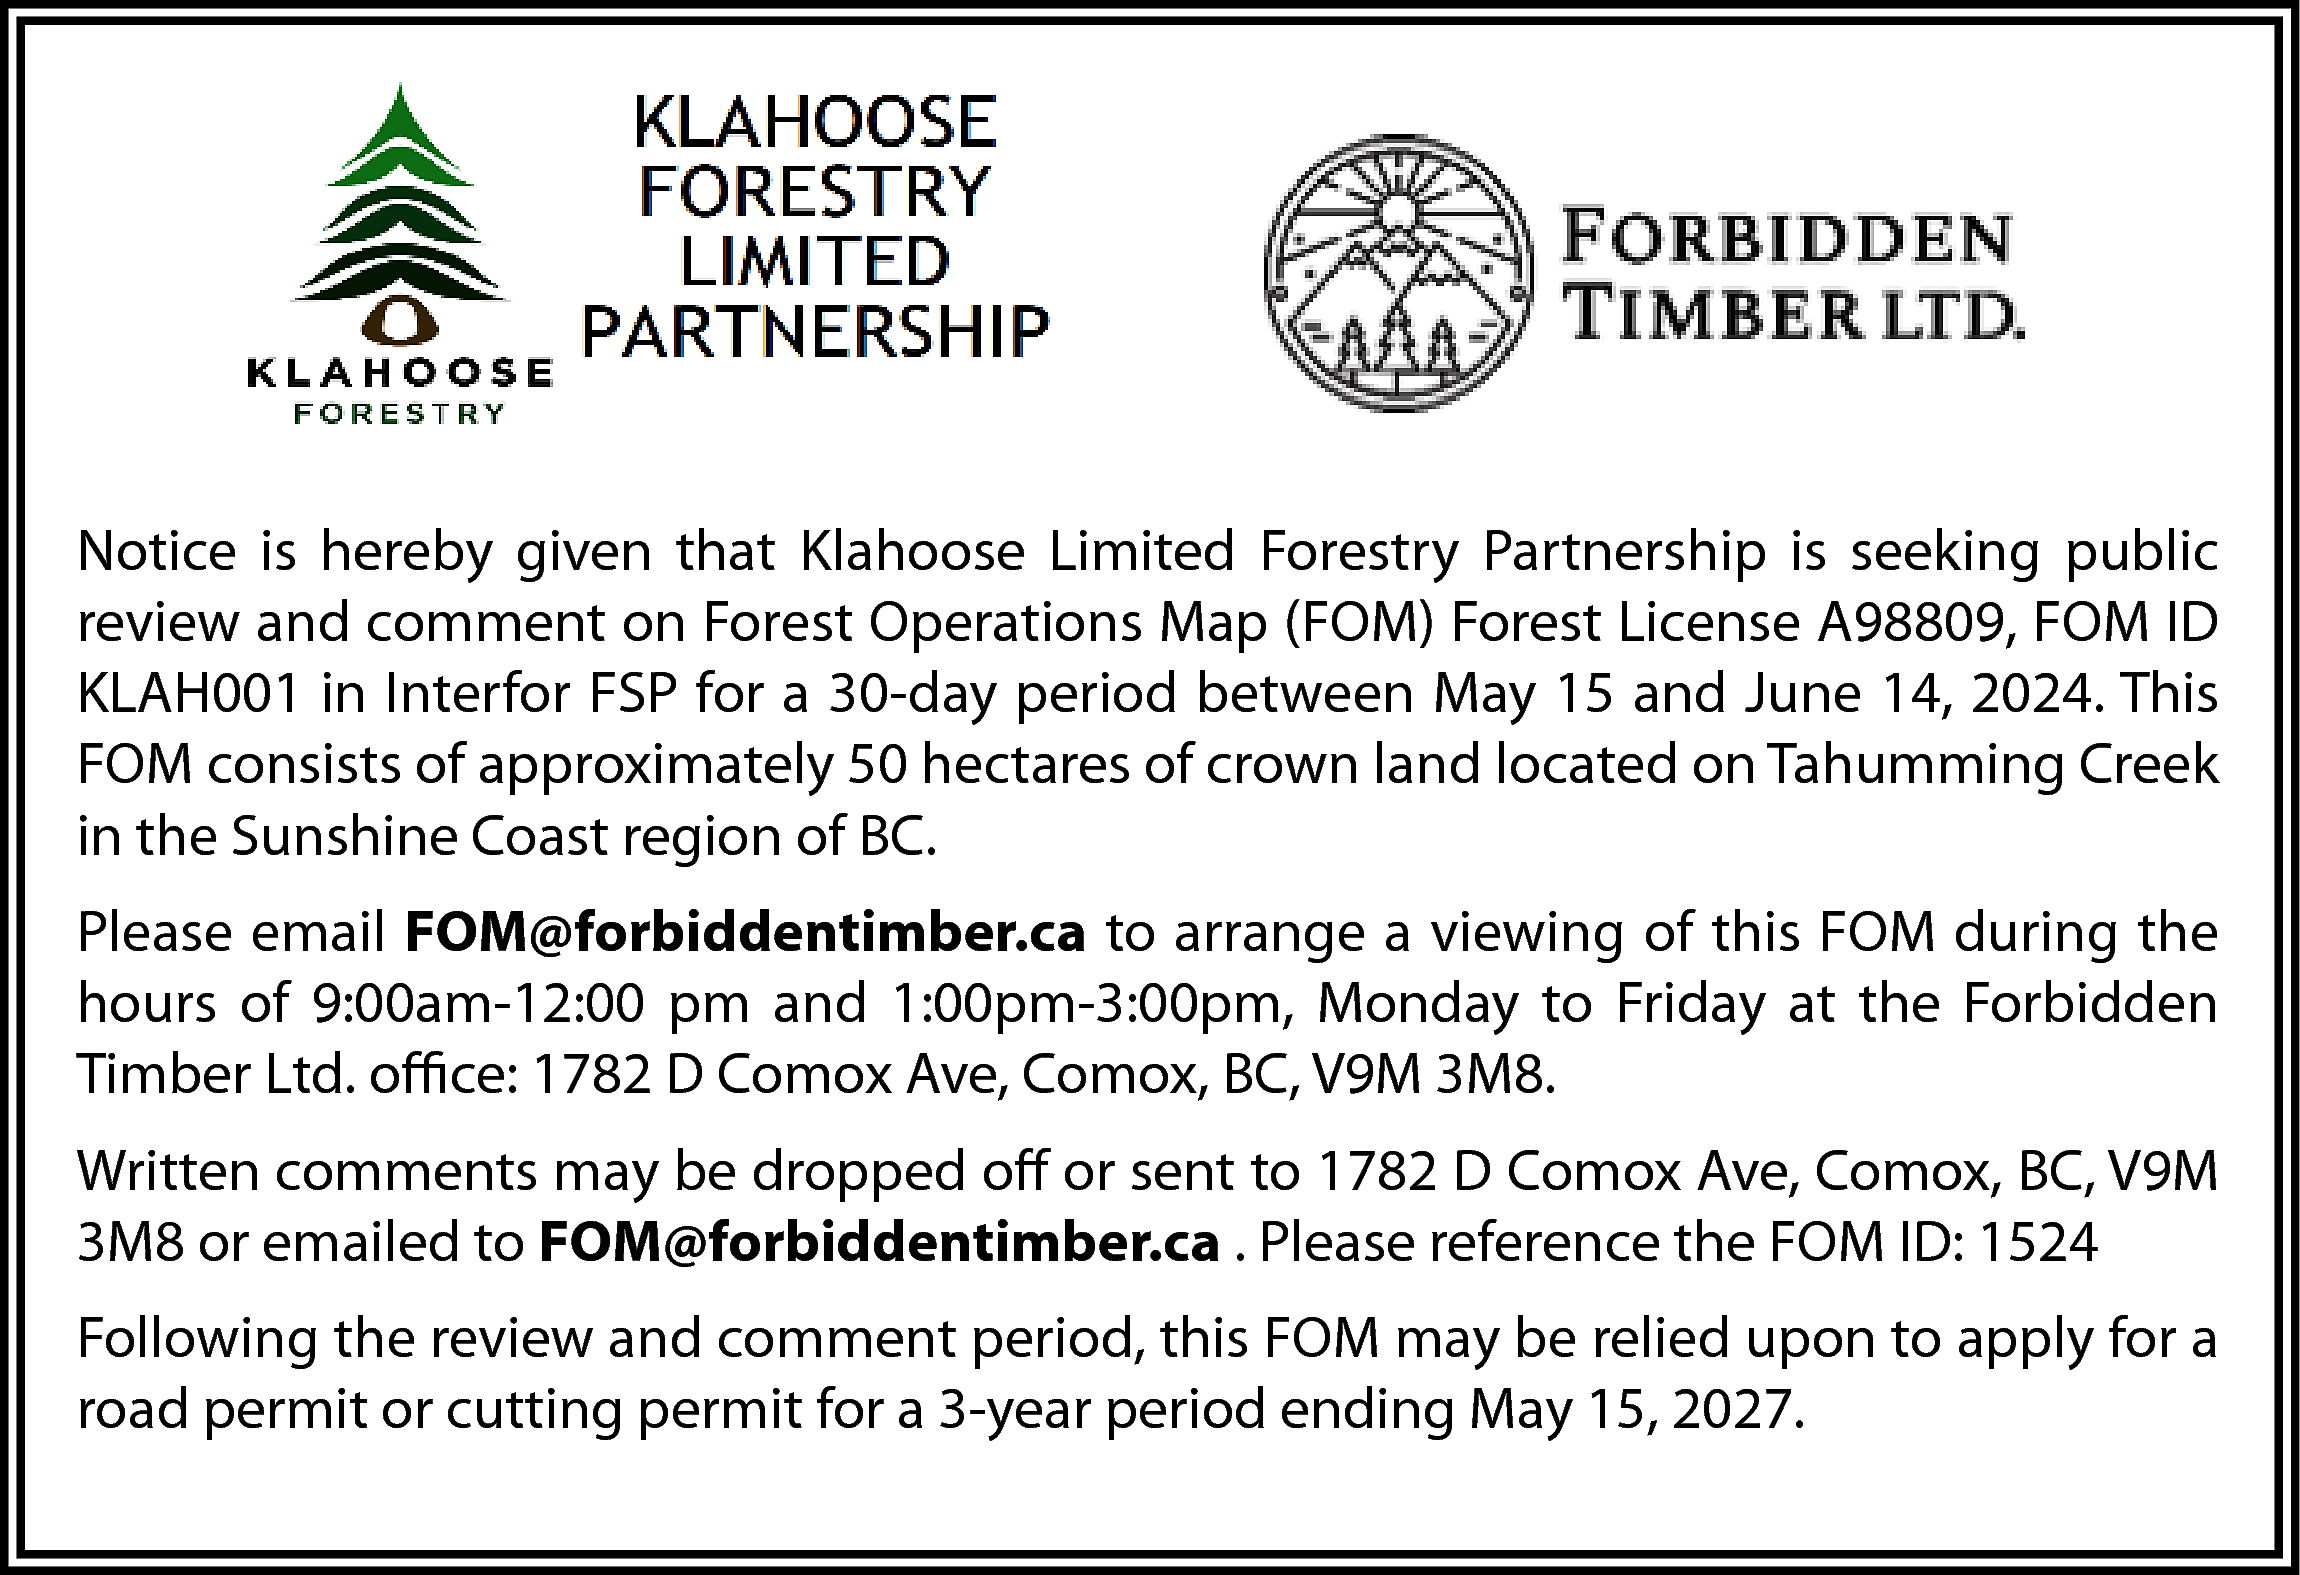 Notice is hereby given that  Notice is hereby given that Klahoose Limited Forestry Partnership is seeking public  review and comment on Forest Operations Map (FOM) Forest License A98809, FOM ID  KLAH001 in Interfor FSP for a 30-day period between May 15 and June 14, 2024. This  FOM consists of approximately 50 hectares of crown land located on Tahumming Creek  in the Sunshine Coast region of BC.  Please email FOM@forbiddentimber.ca to arrange a viewing of this FOM during the  hours of 9:00am-12:00 pm and 1:00pm-3:00pm, Monday to Friday at the Forbidden  Timber Ltd. office: 1782 D Comox Ave, Comox, BC, V9M 3M8.  Written comments may be dropped off or sent to 1782 D Comox Ave, Comox, BC, V9M  3M8 or emailed to FOM@forbiddentimber.ca . Please reference the FOM ID: 1524  Following the review and comment period, this FOM may be relied upon to apply for a  road permit or cutting permit for a 3-year period ending May 15, 2027.    